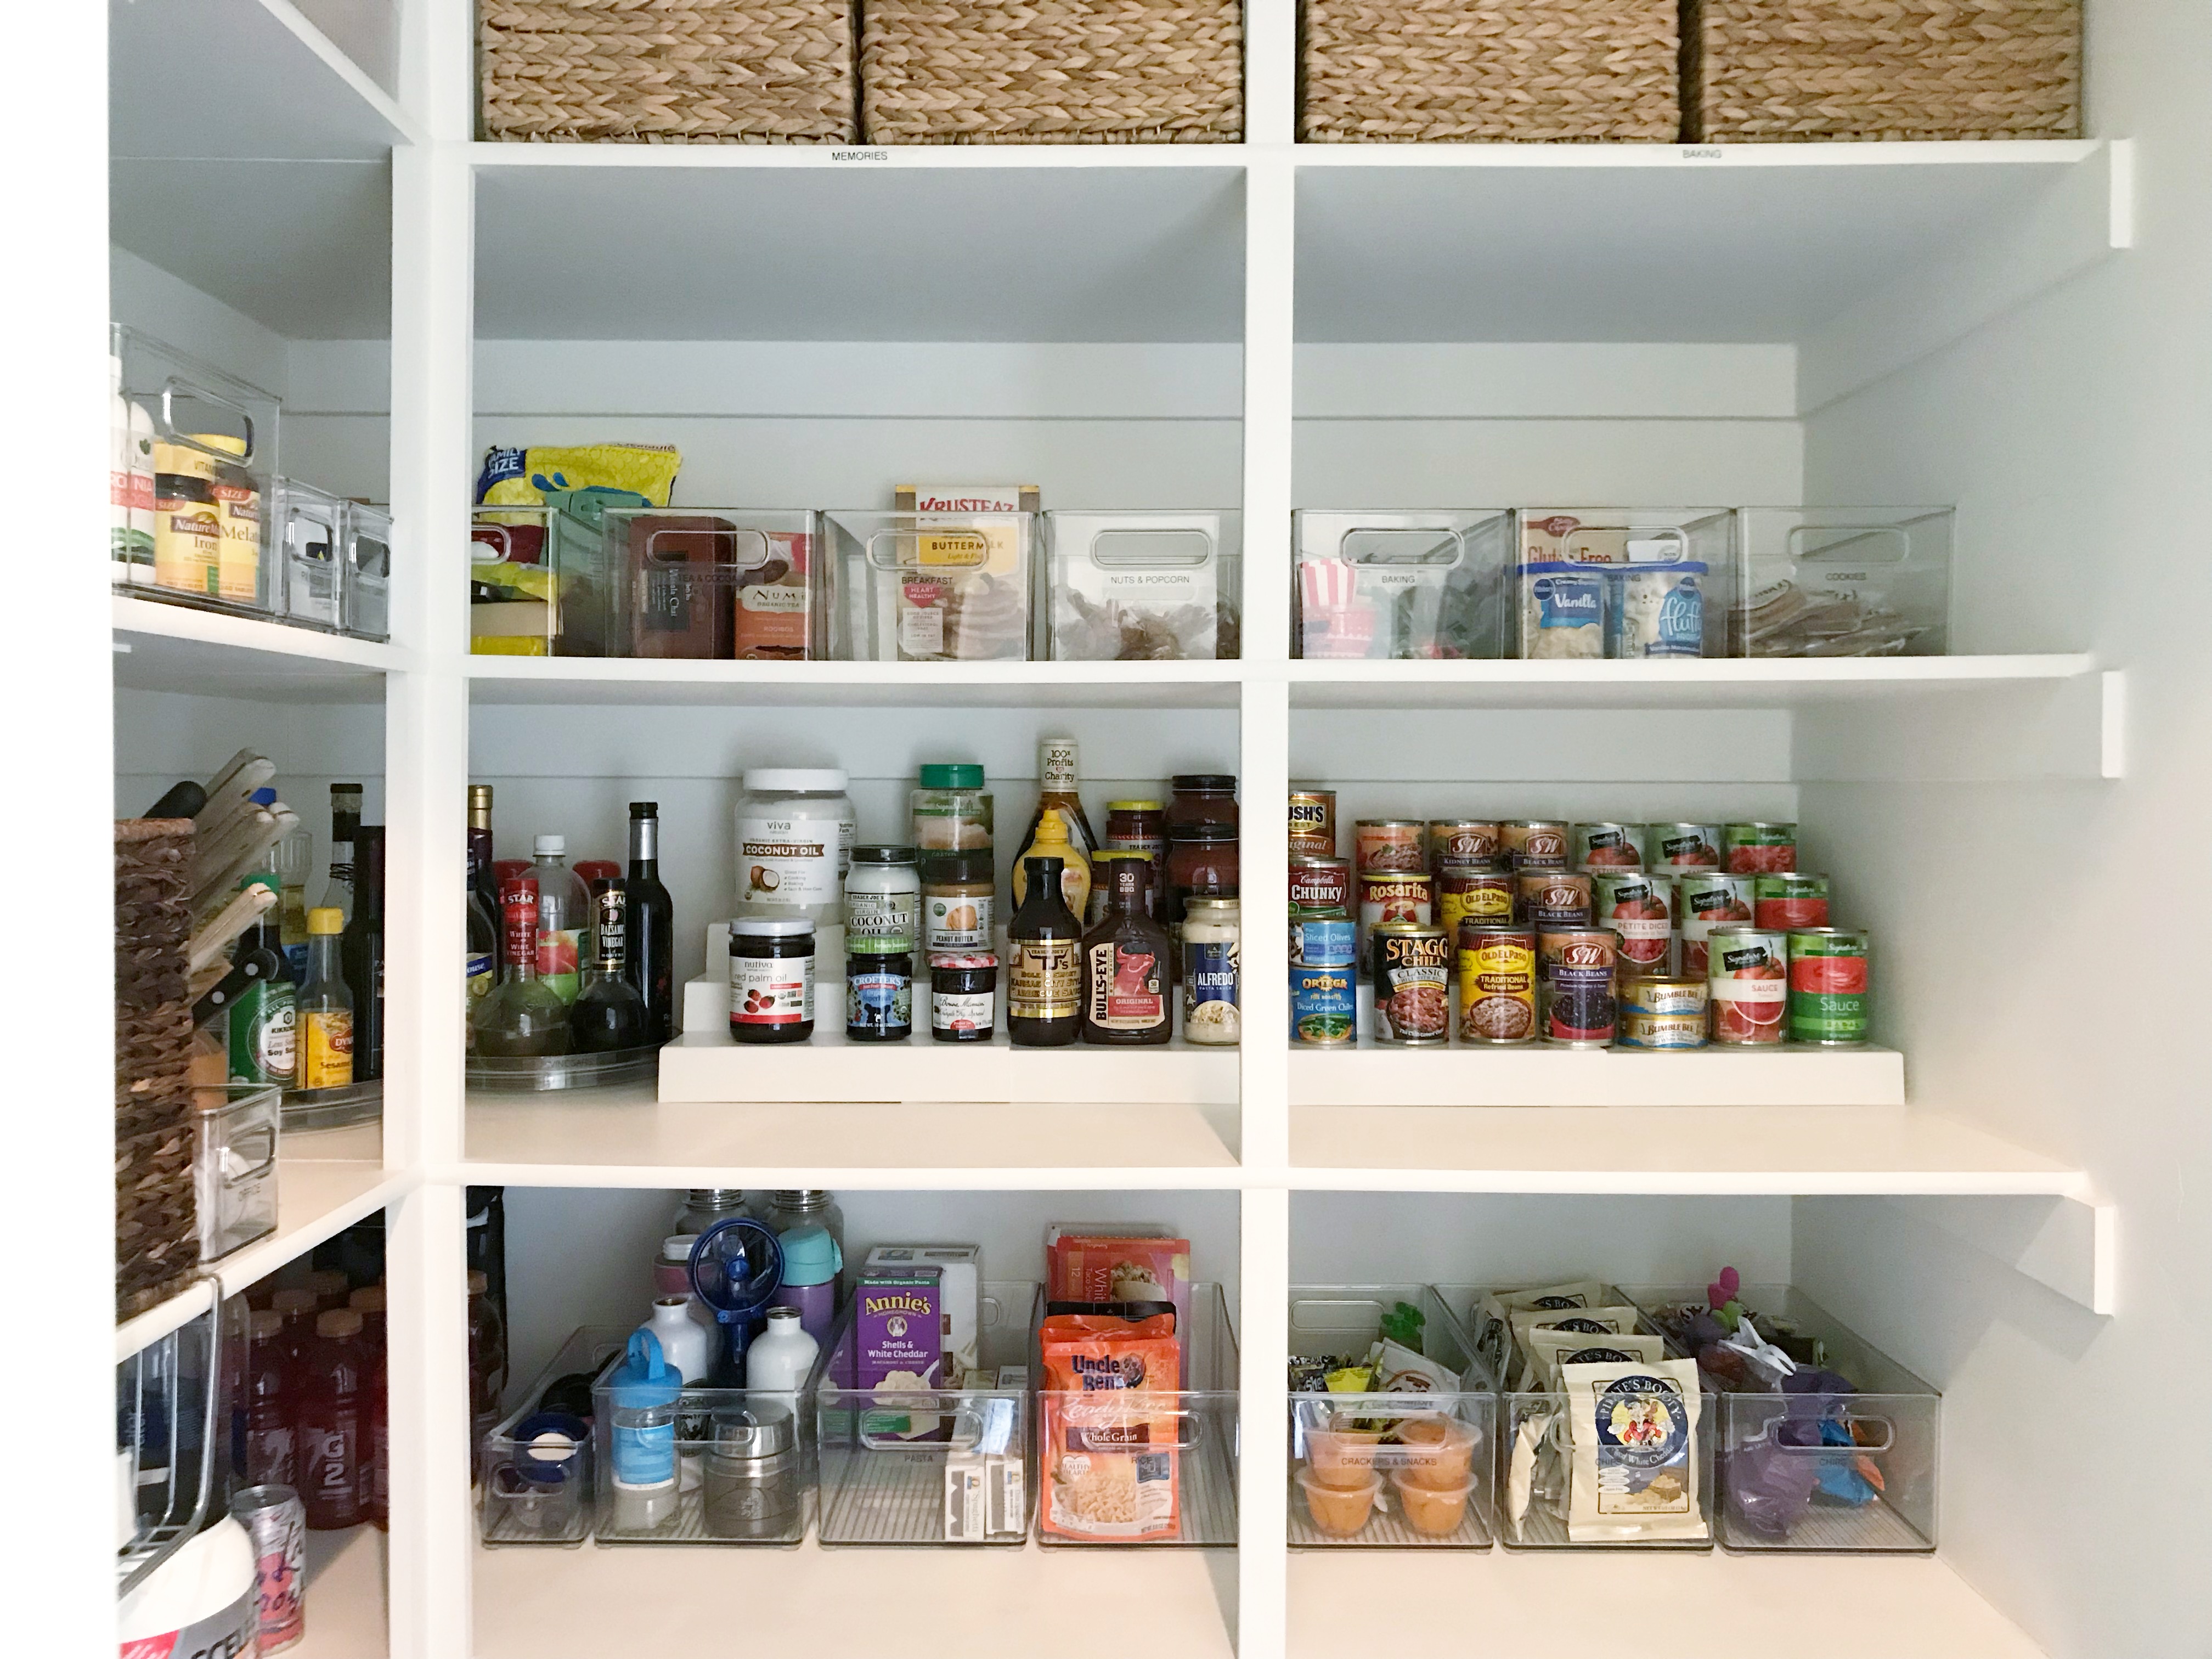 https://simplyorganized.me/wp-content/uploads/2018/04/How-To-Organize-A-White-Pantry.jpg